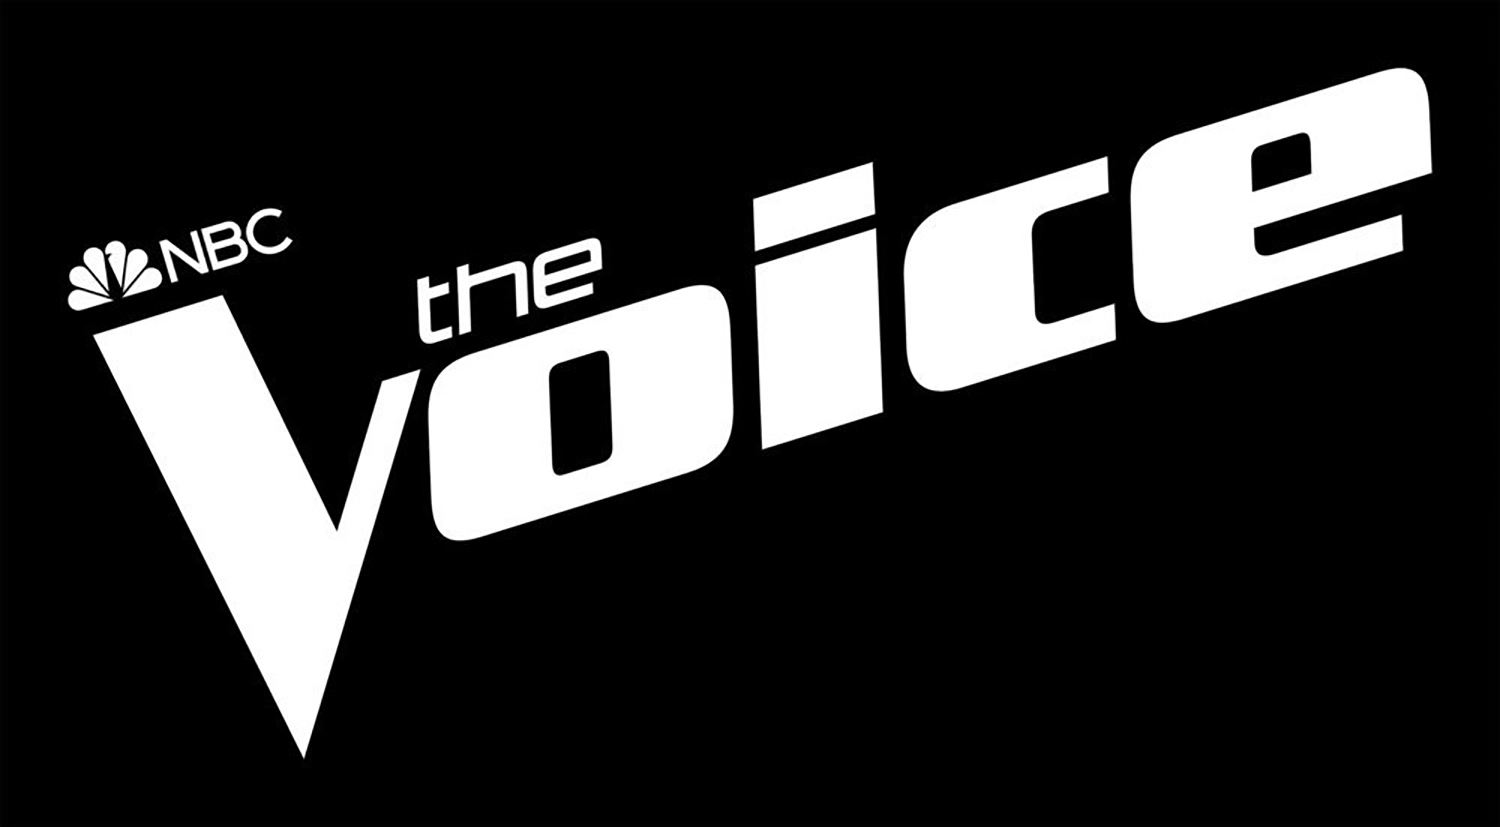 Logo for The Voice Season 22, which could have format changes.